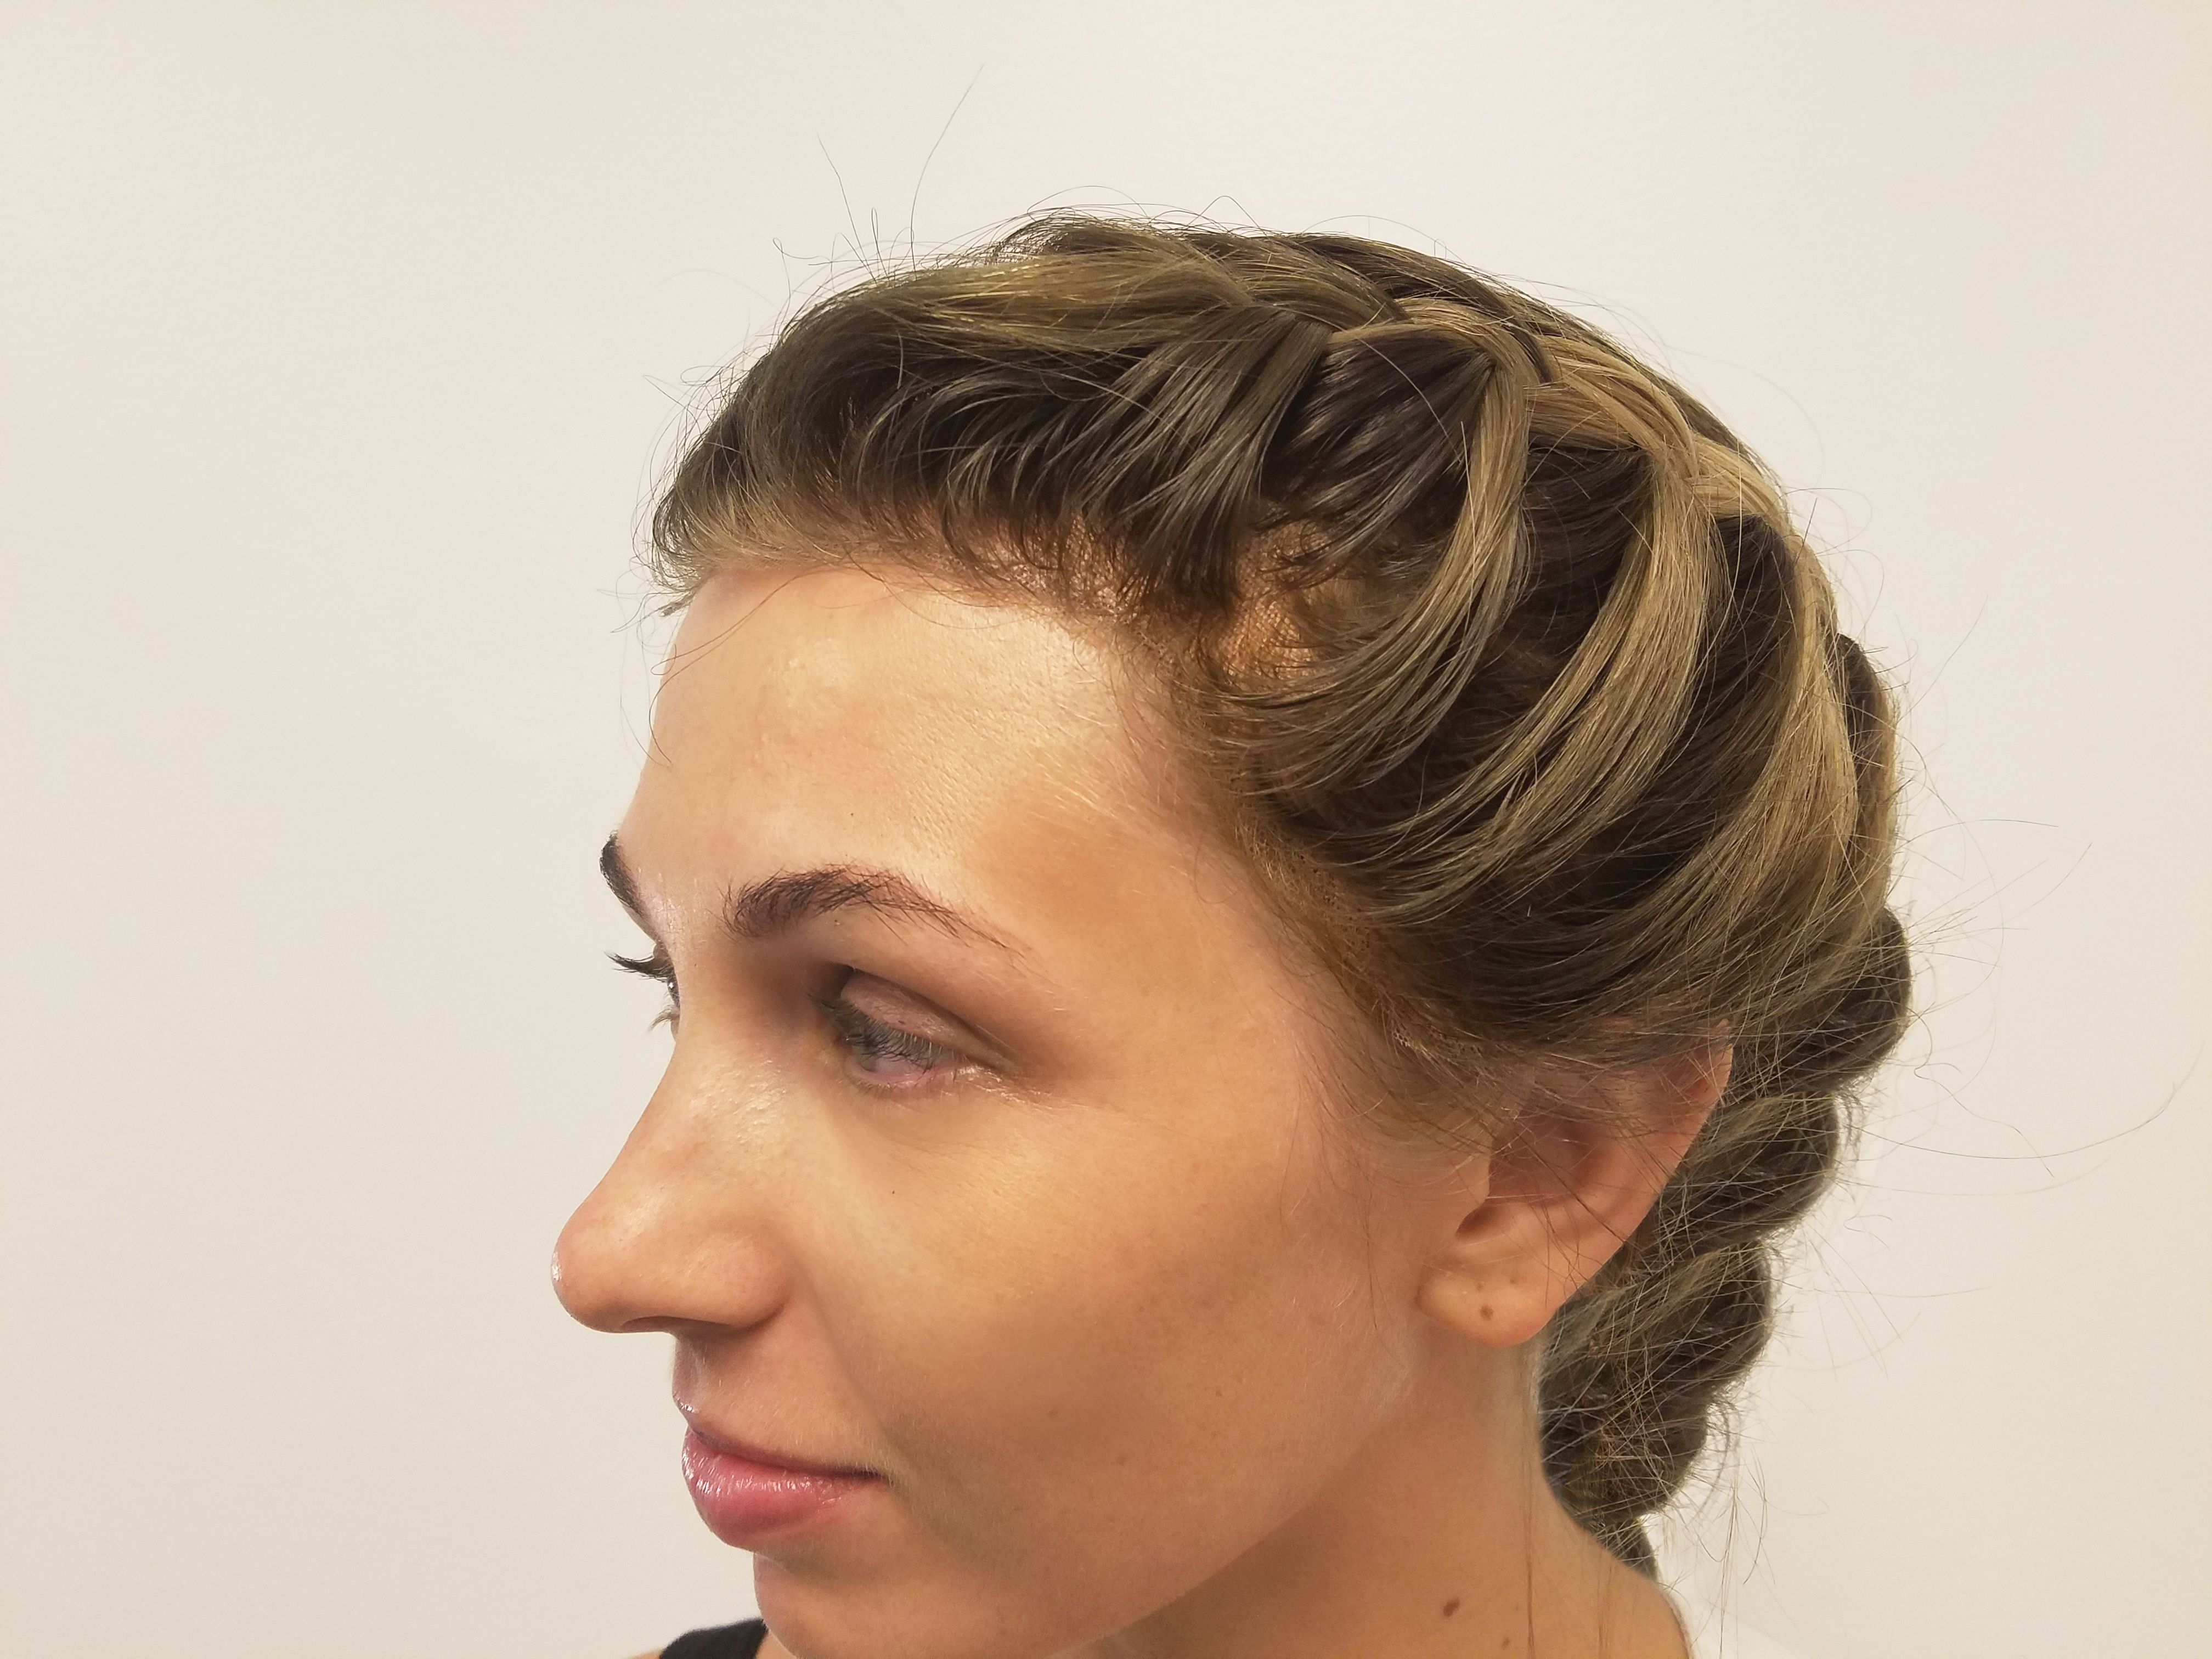 Profile view of styled/braided wig.